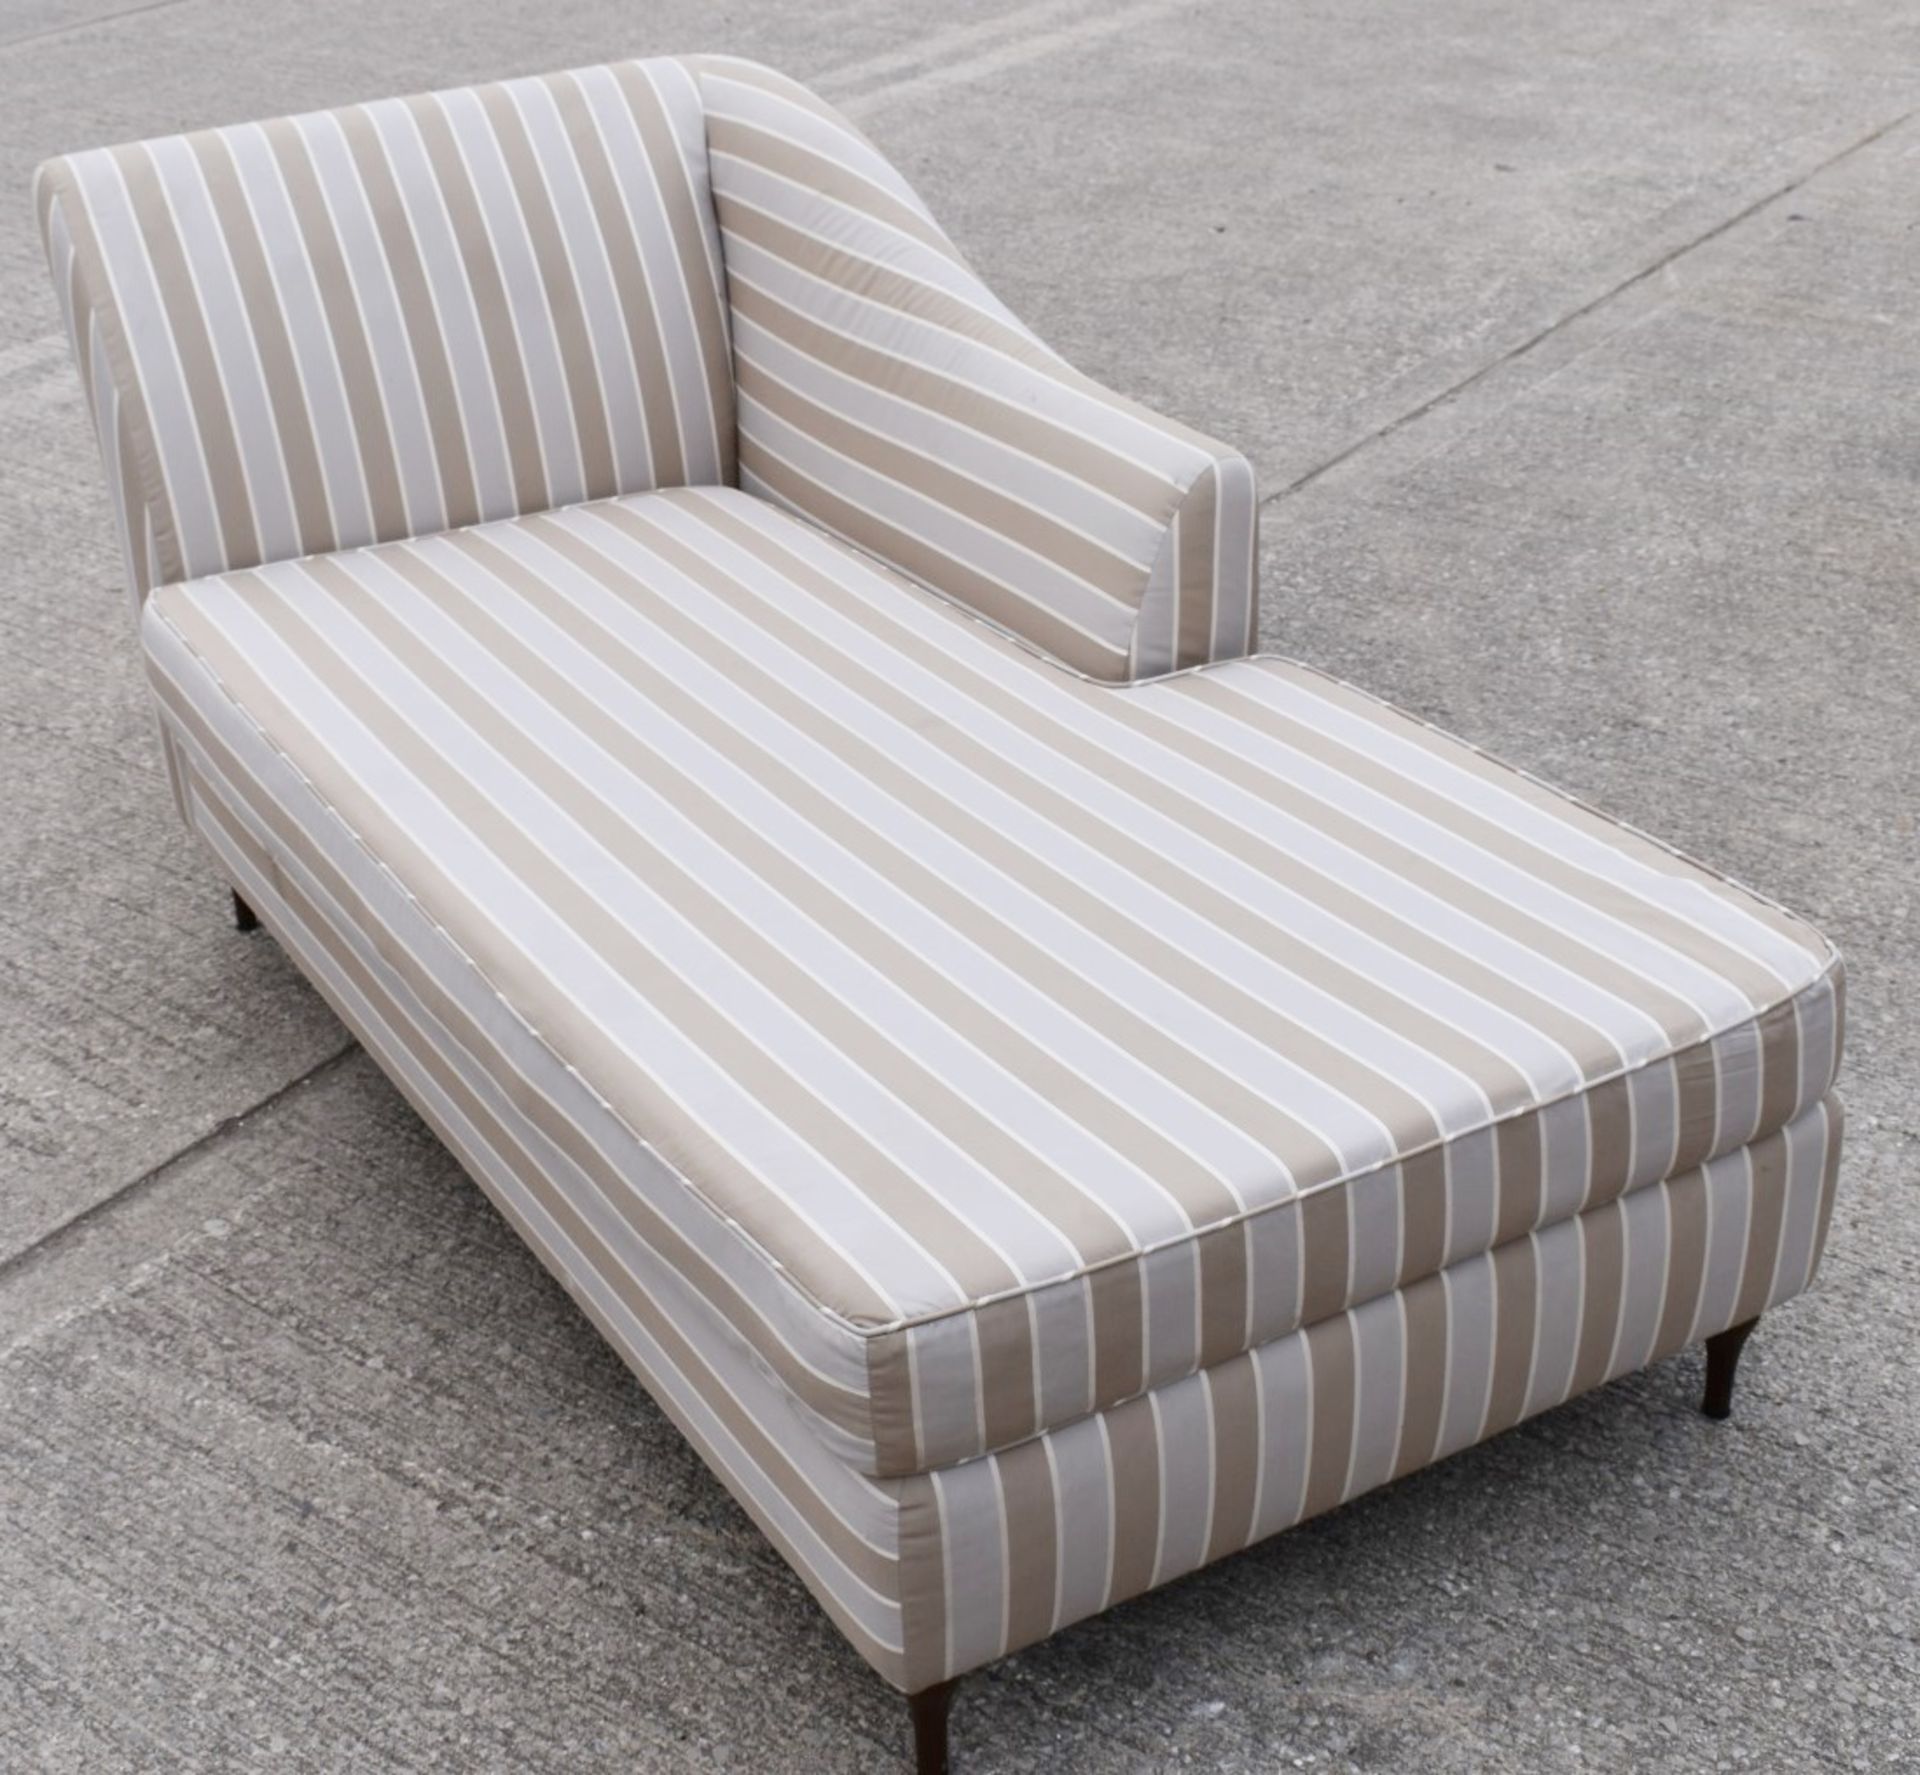 1 x Classically Styled Chaise Lounge Upholstered in a Premium Striped Fabric - Recently Procured